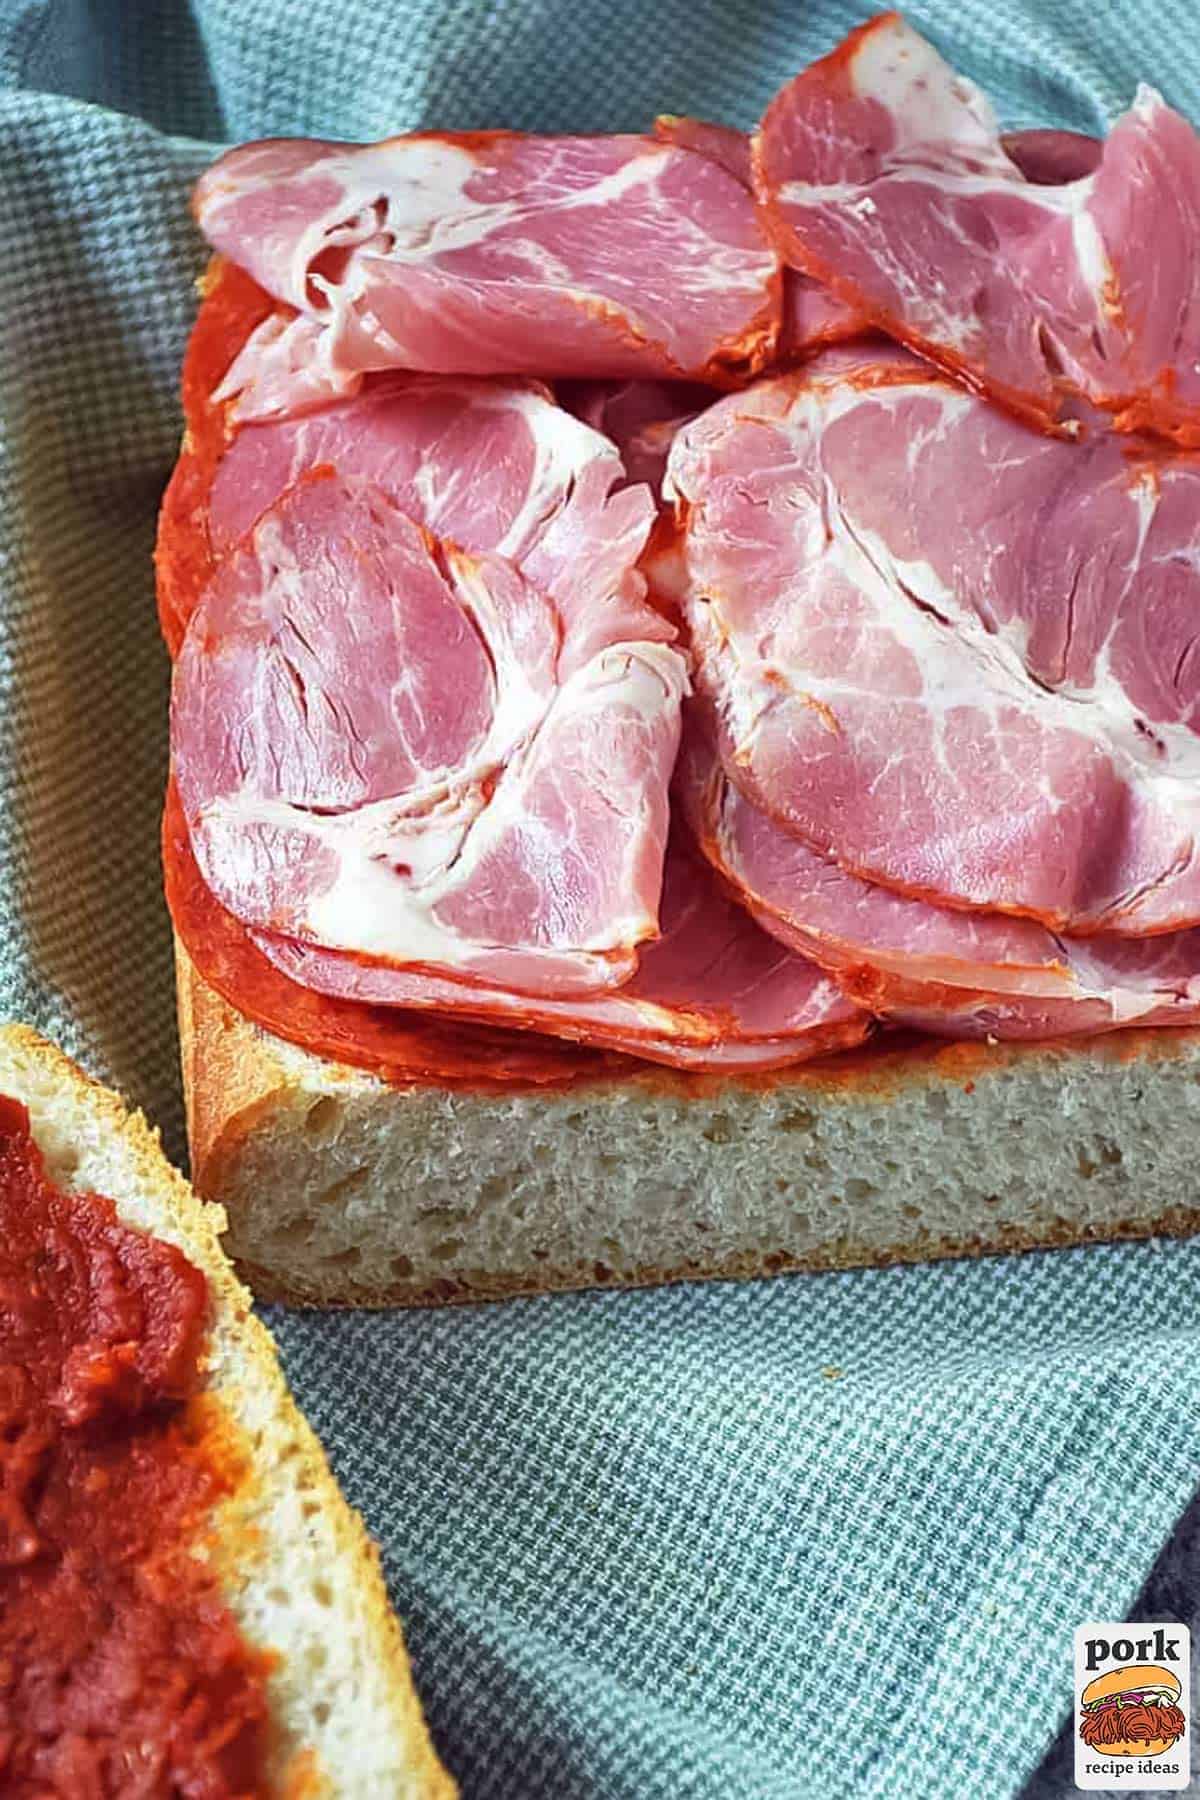 the ham and pepperoni layered on bread